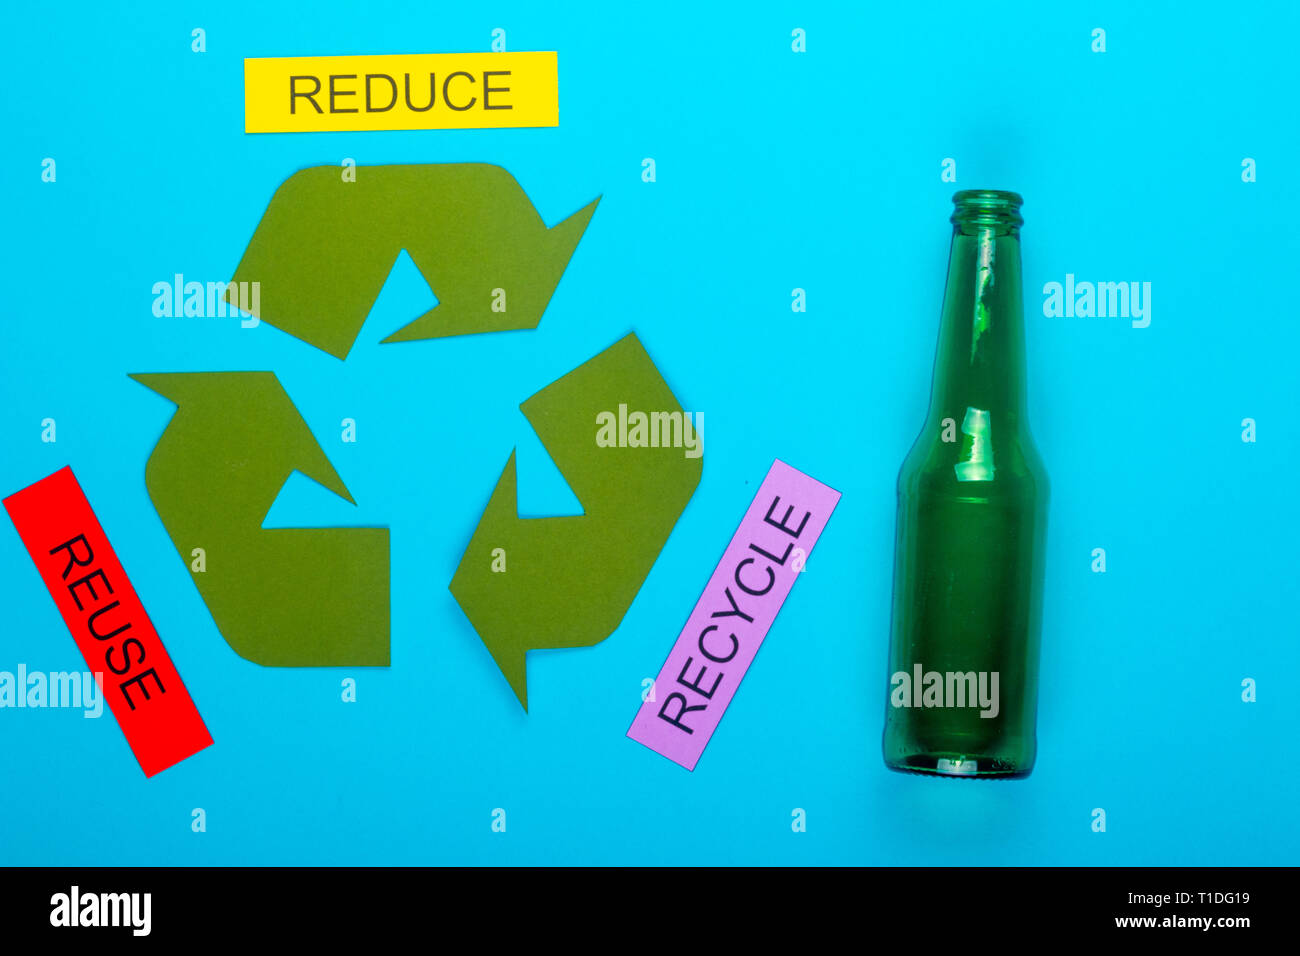 Recycle concept showing the green recycle logo with reduce, reuse, recycle  & glass on a blue background Stock Photo - Alamy